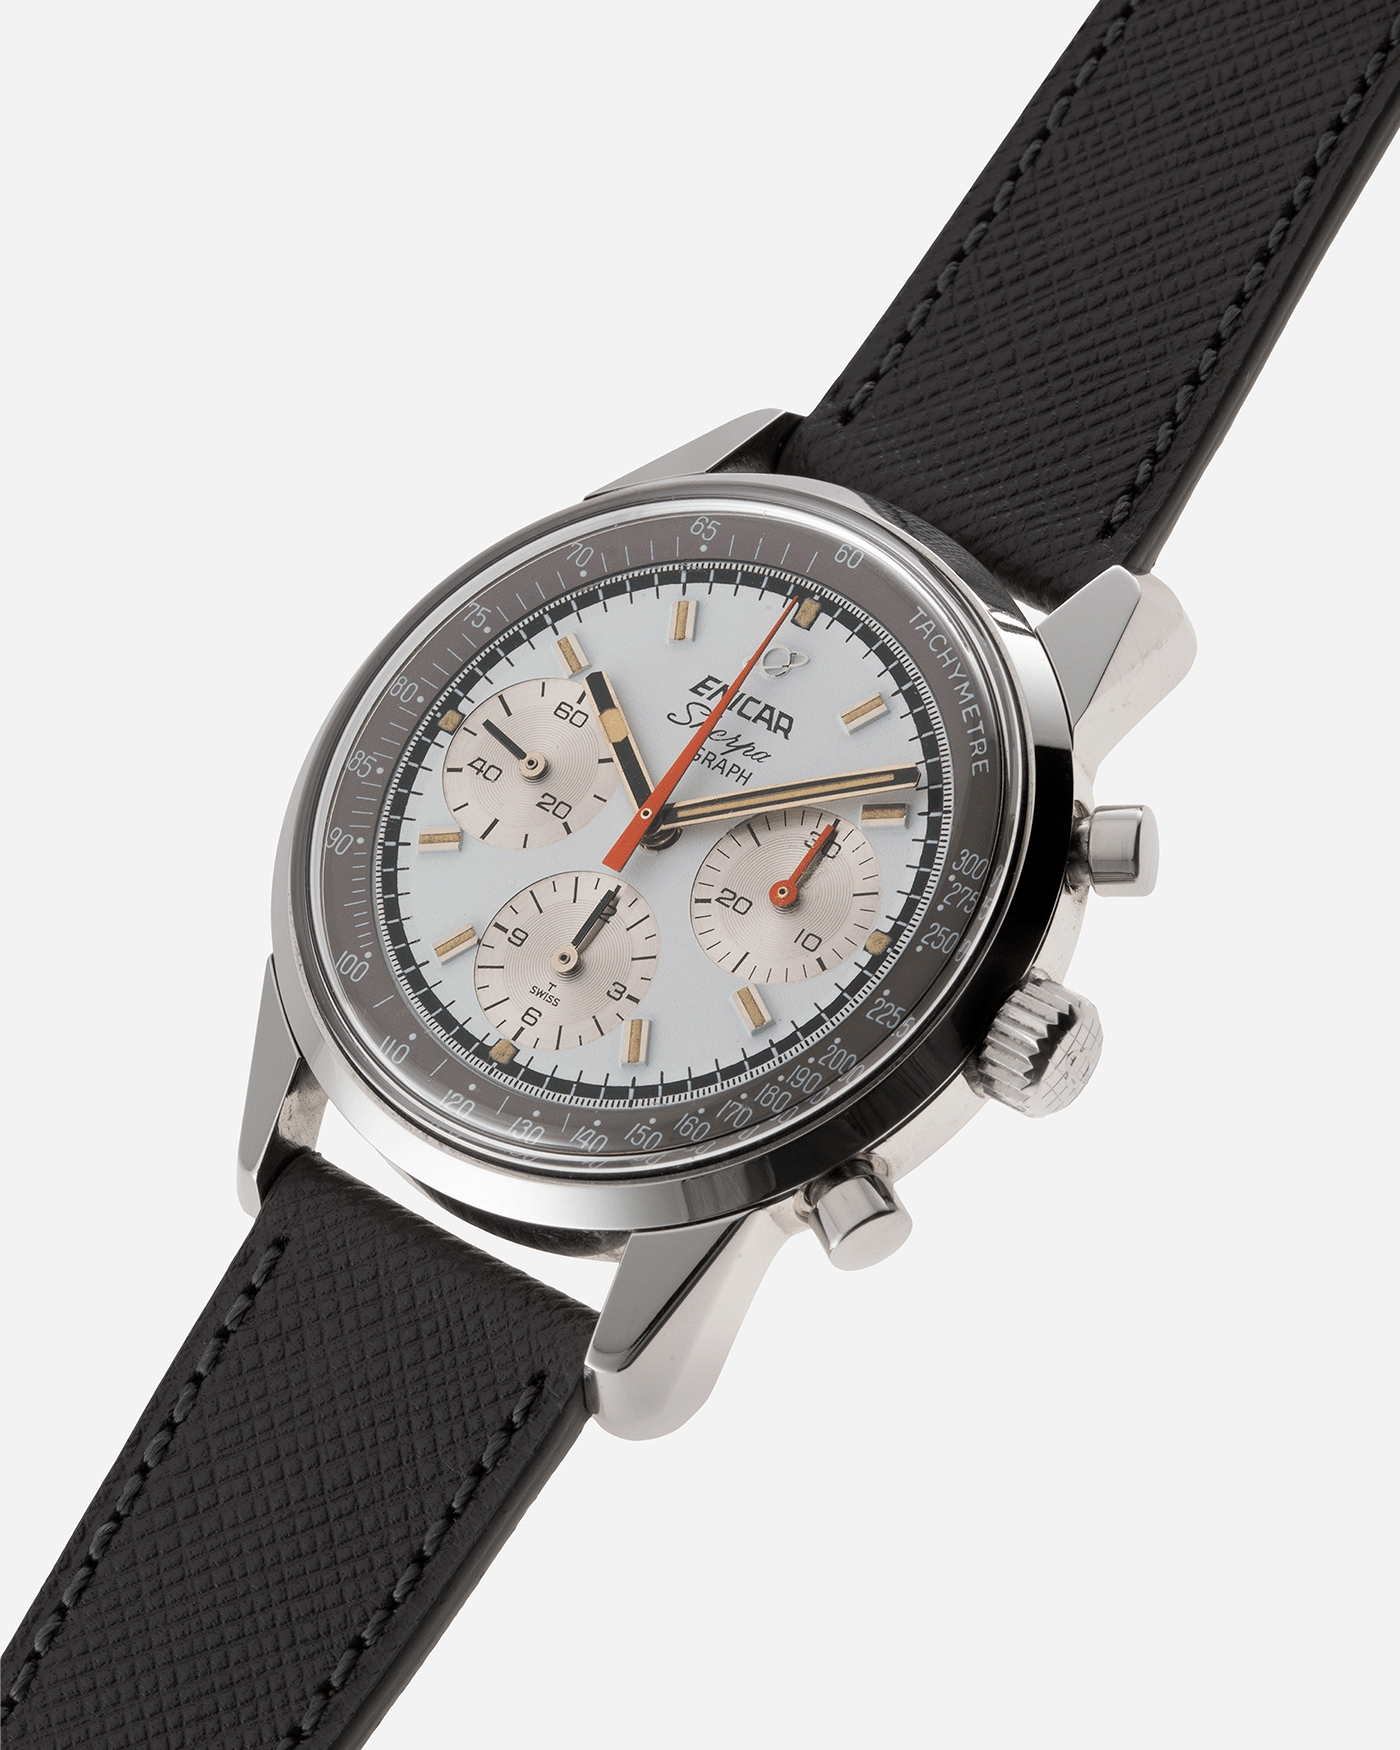 Brand: Enicar Year: 1960s Model: Sherpa Graph Material: Stainless Steel Movement: Valjoux 72 Case Diameter: 40mm Lug Width: 20mm Bracelet/Strap: Grey Molequin Textured Calf Strap